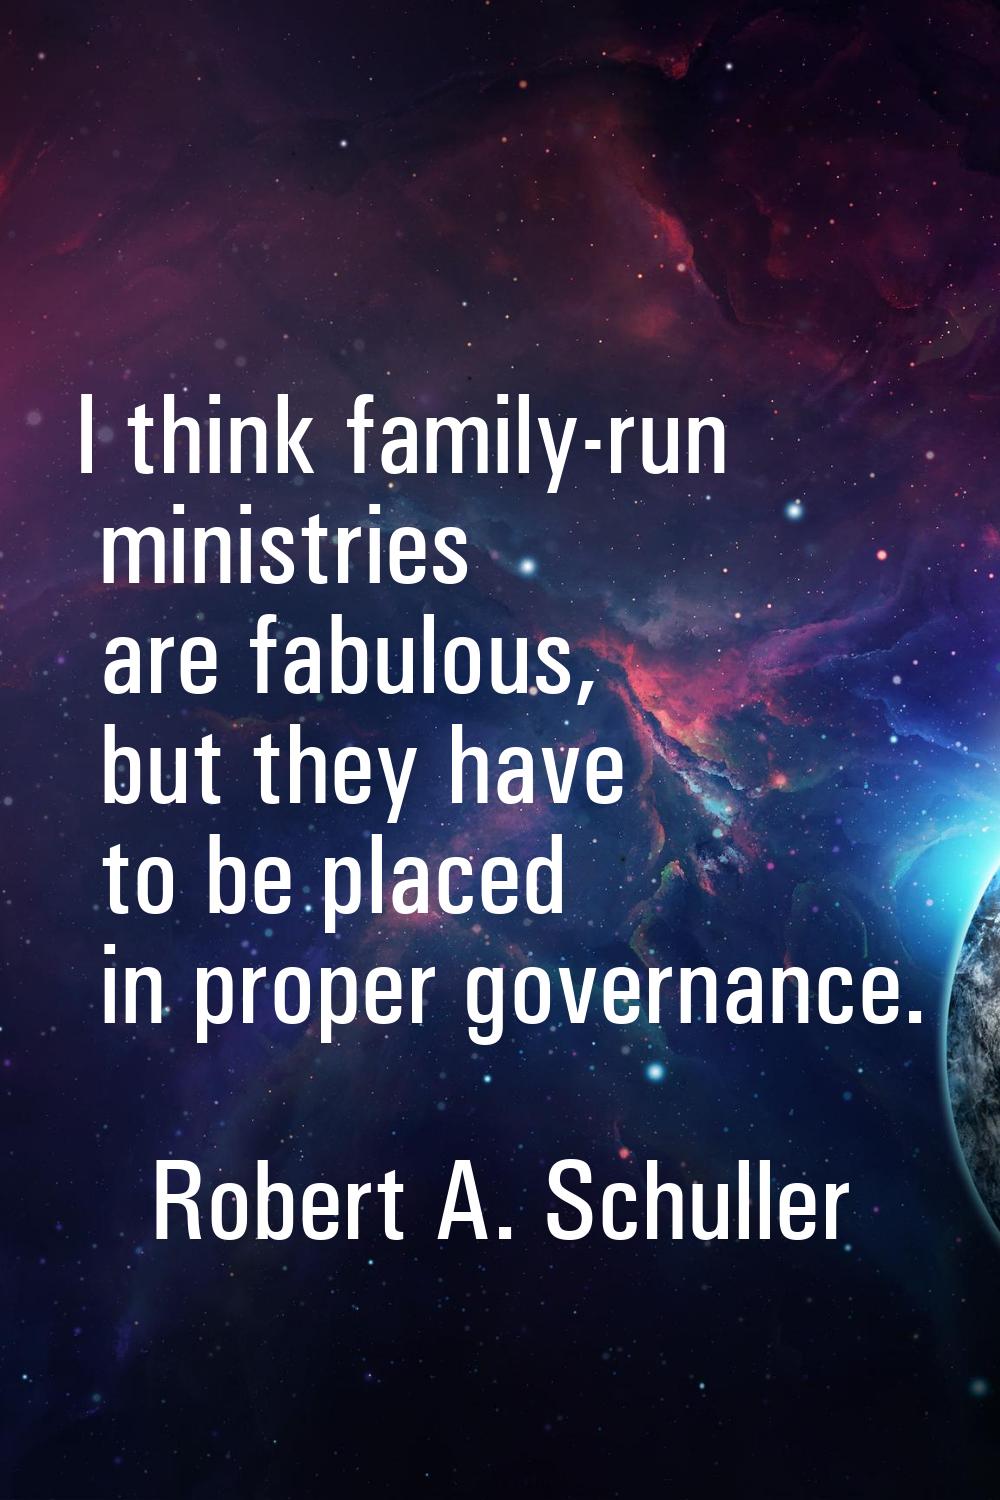 I think family-run ministries are fabulous, but they have to be placed in proper governance.